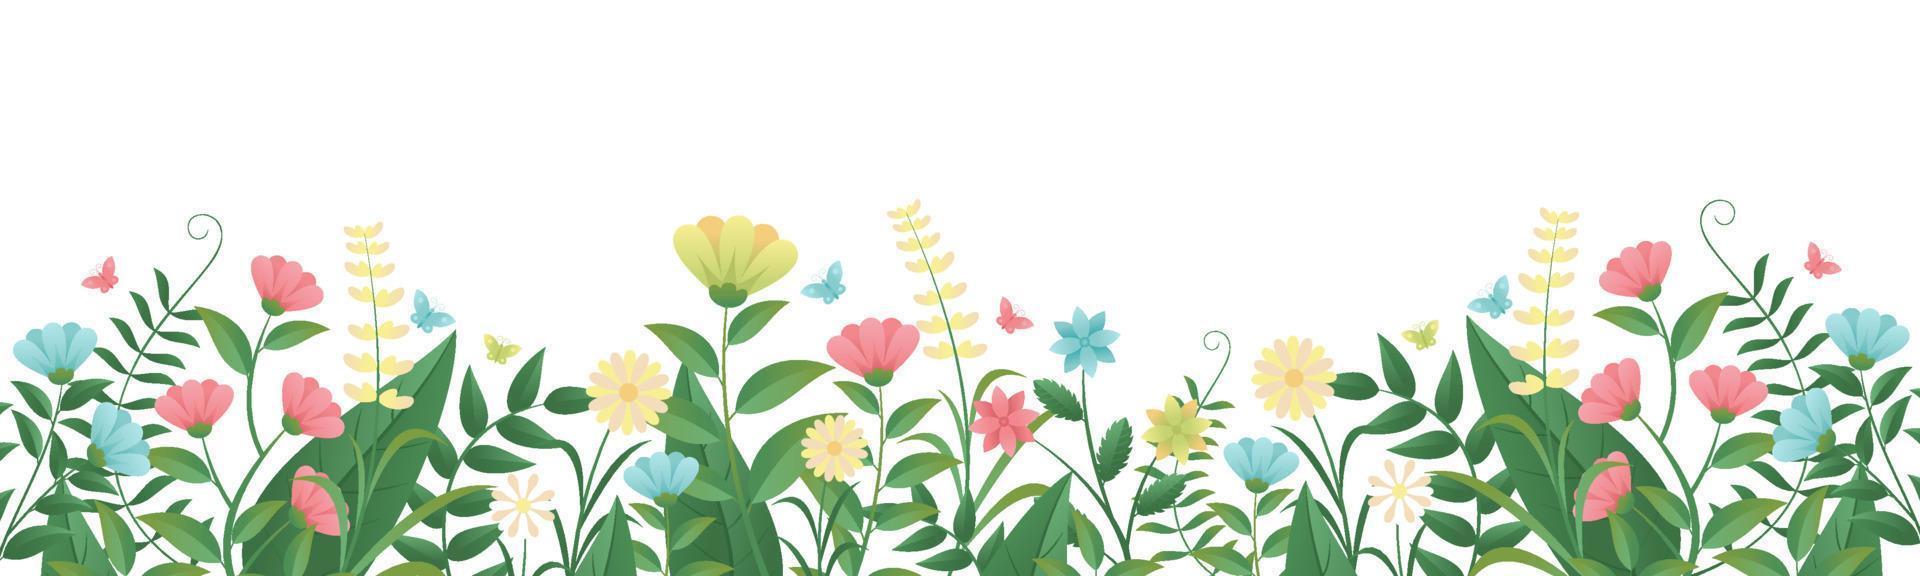 Spring grass and flowers, Easter greeting card decoration element, Park decoration element with spring grass and meadow flowers for spring sale, banner, poster, cover, templates, social media, feed vector